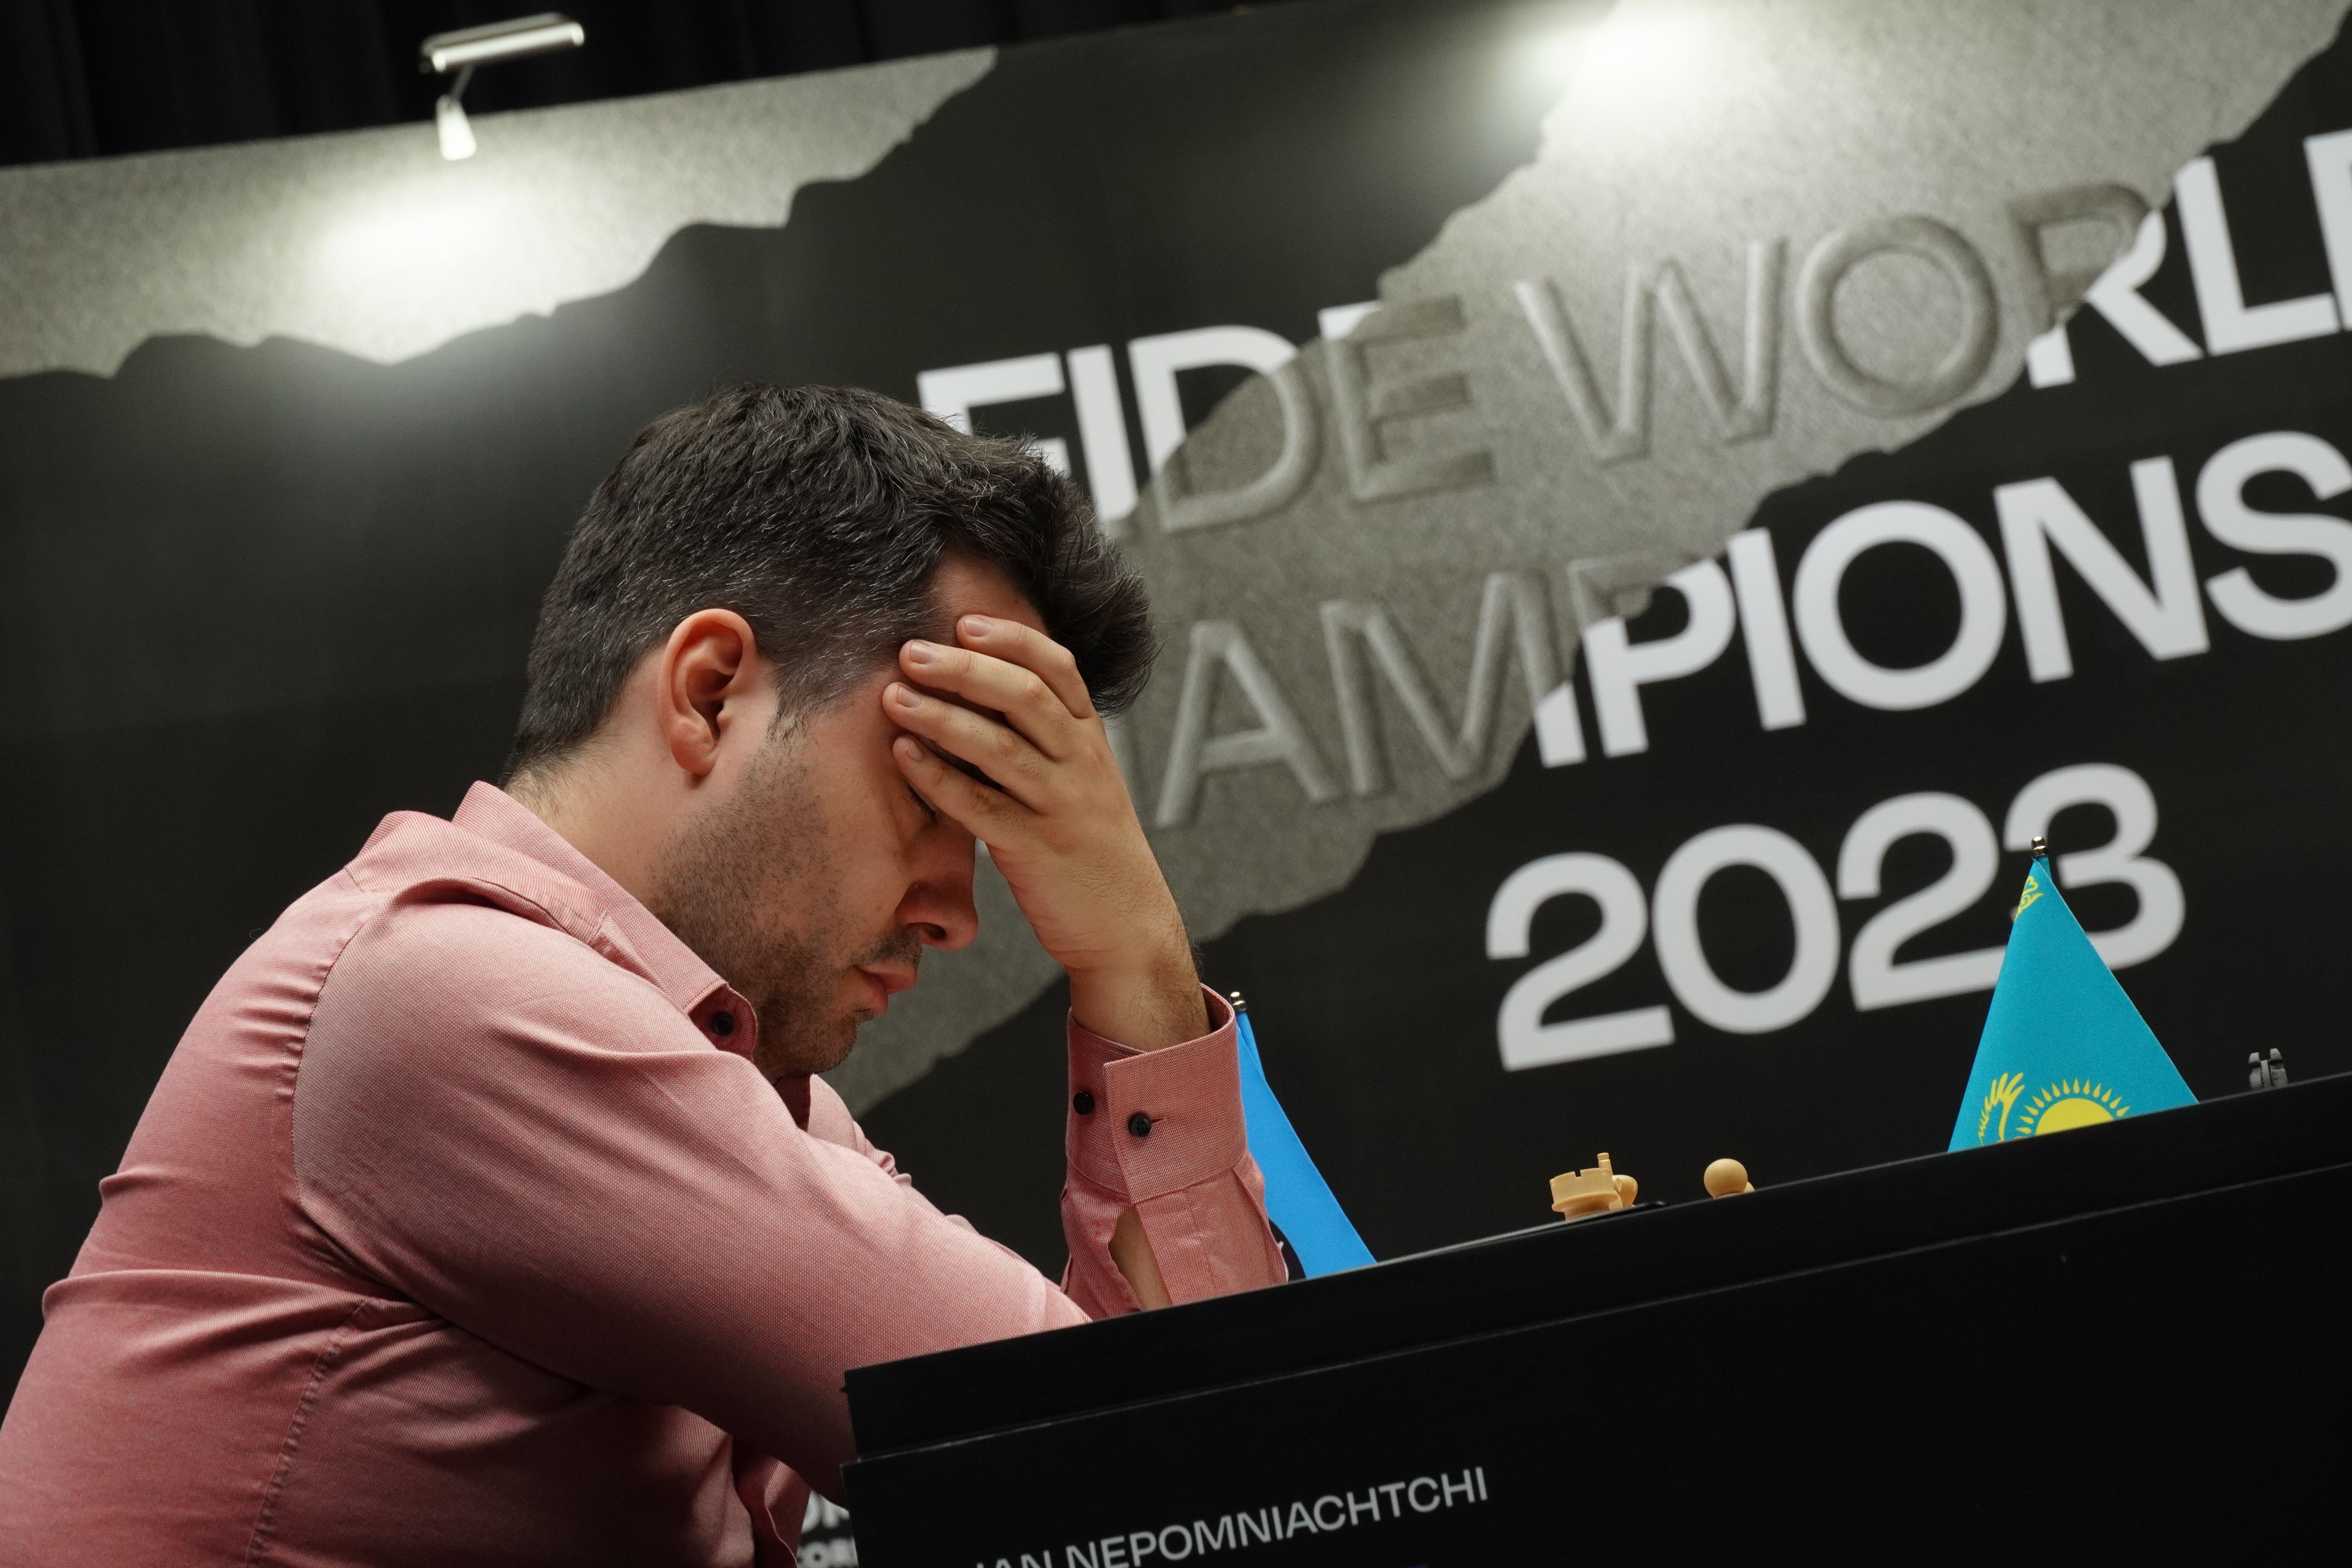 Chess.com unveils a star-studded commentary team for the 2023 FIDE